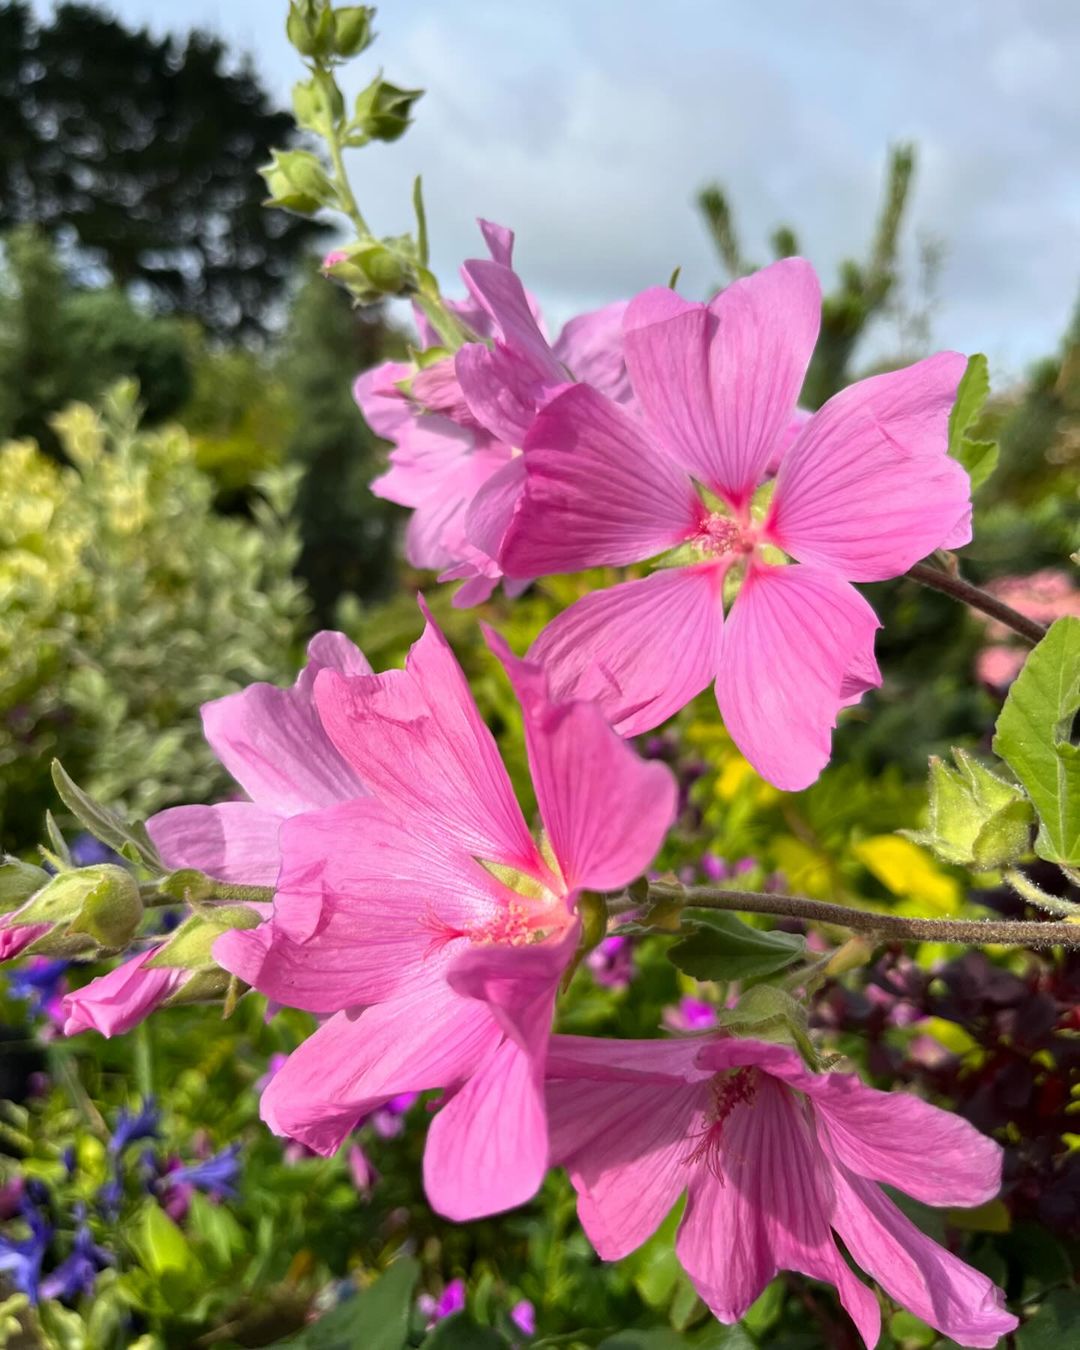 Lush green leaves provide a backdrop for the delicate pink mallow flowers in the garden.